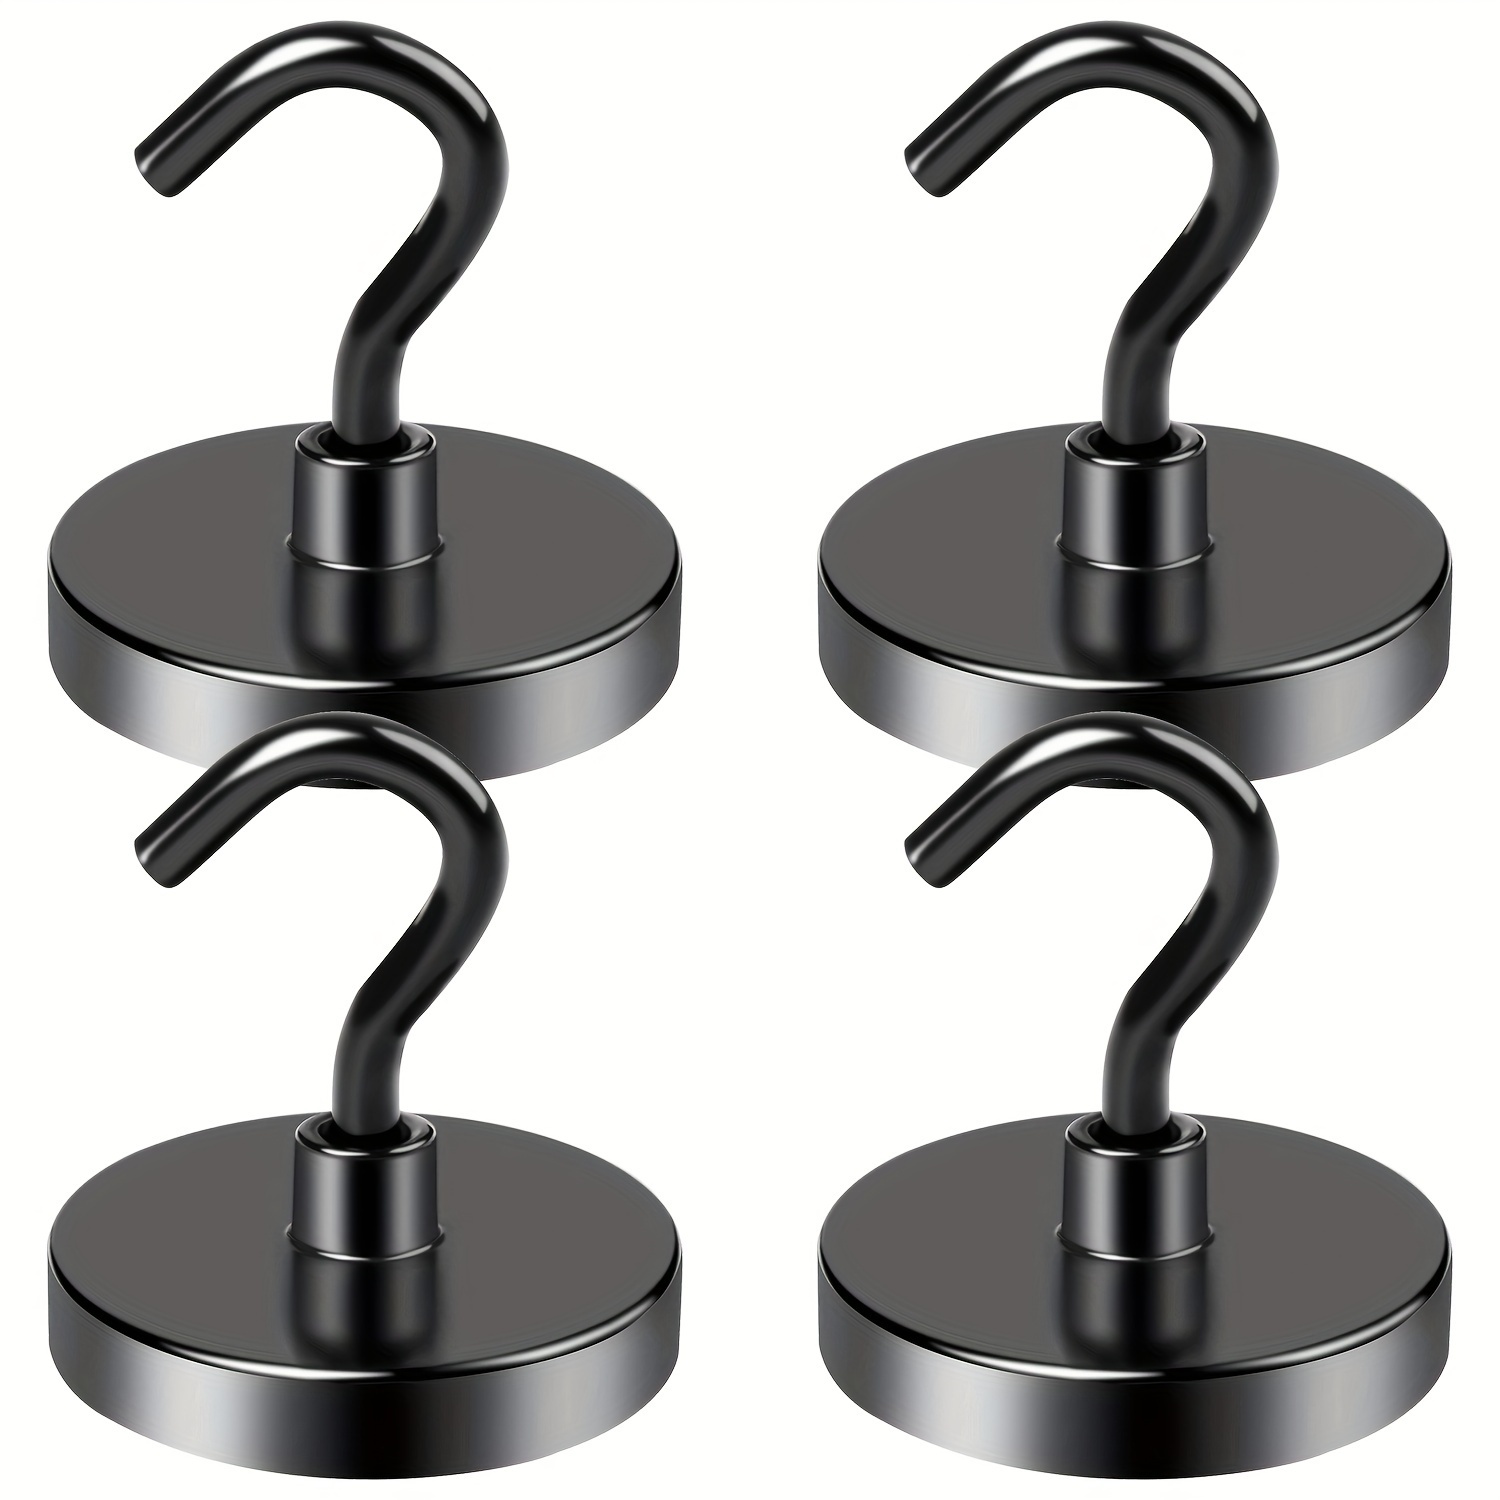 

100lb Black Magnetic Hook Heavy Duty Strong Neodymium Magnetic Hooks, Refrigerator Magnet Hooks, Magnet With Hooks For Curtain, Home, Kitchen, Workplace